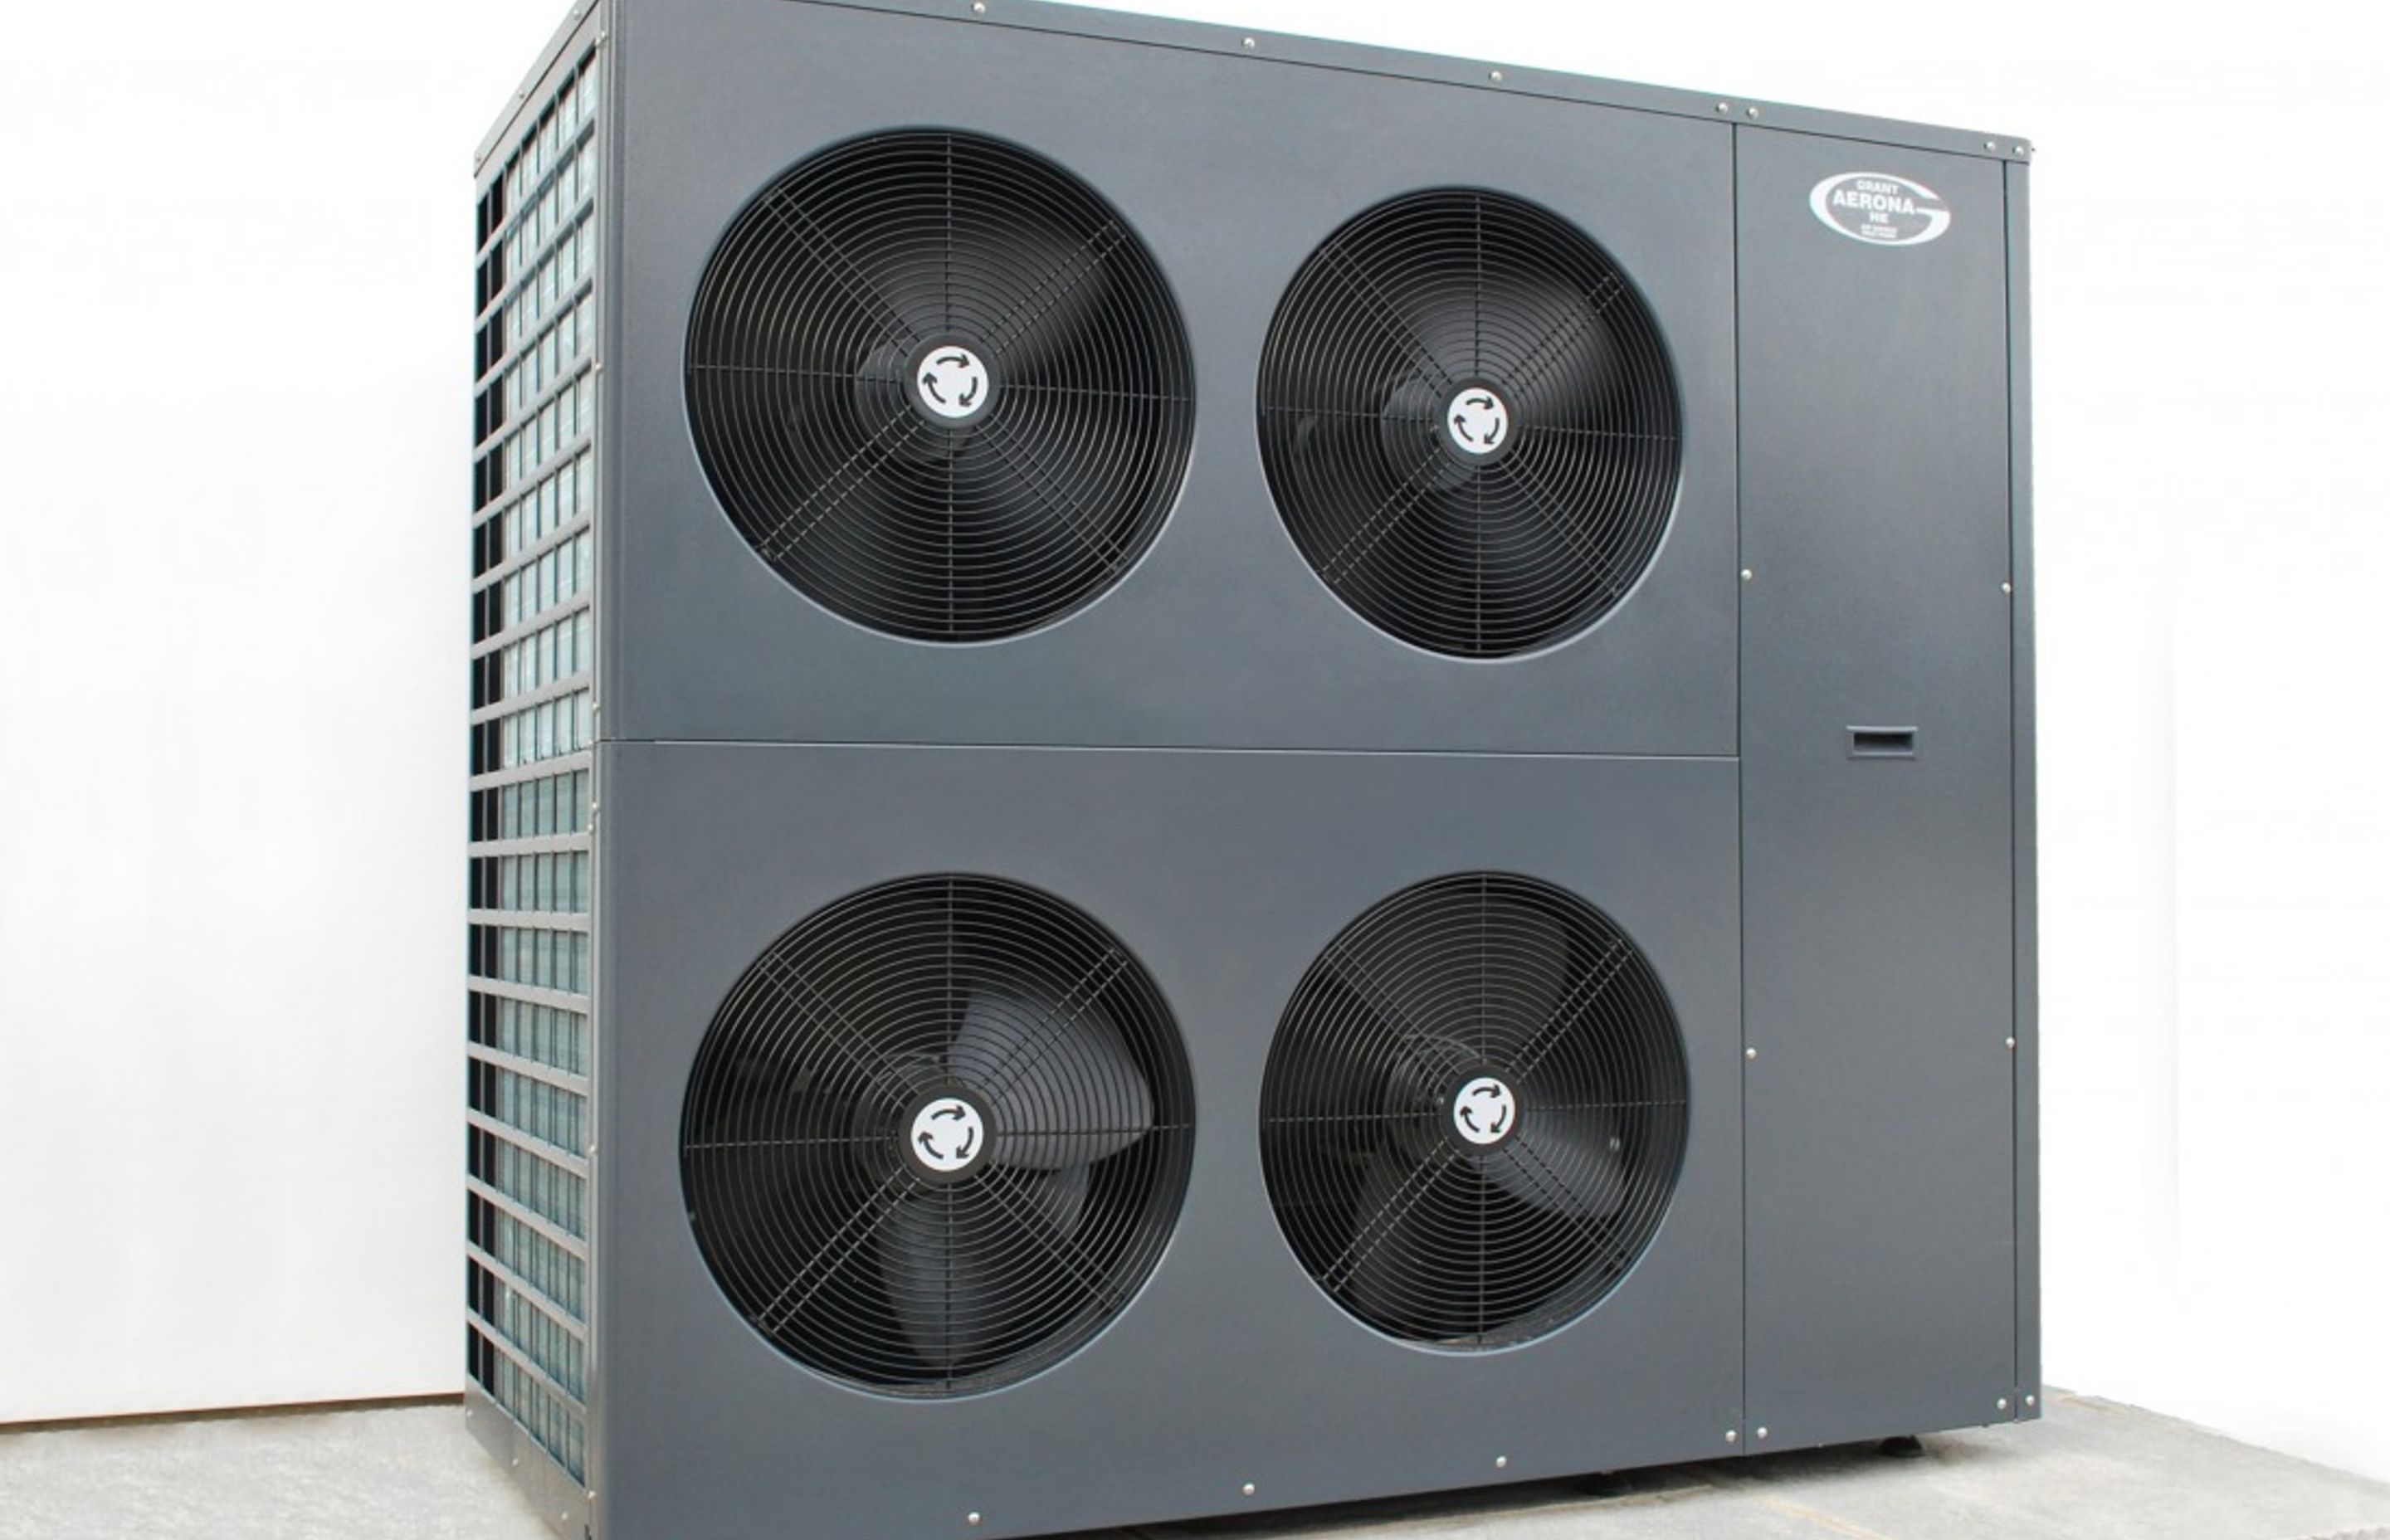 The Grant Air Source Heat Pump is one heat source option for underfloor heating